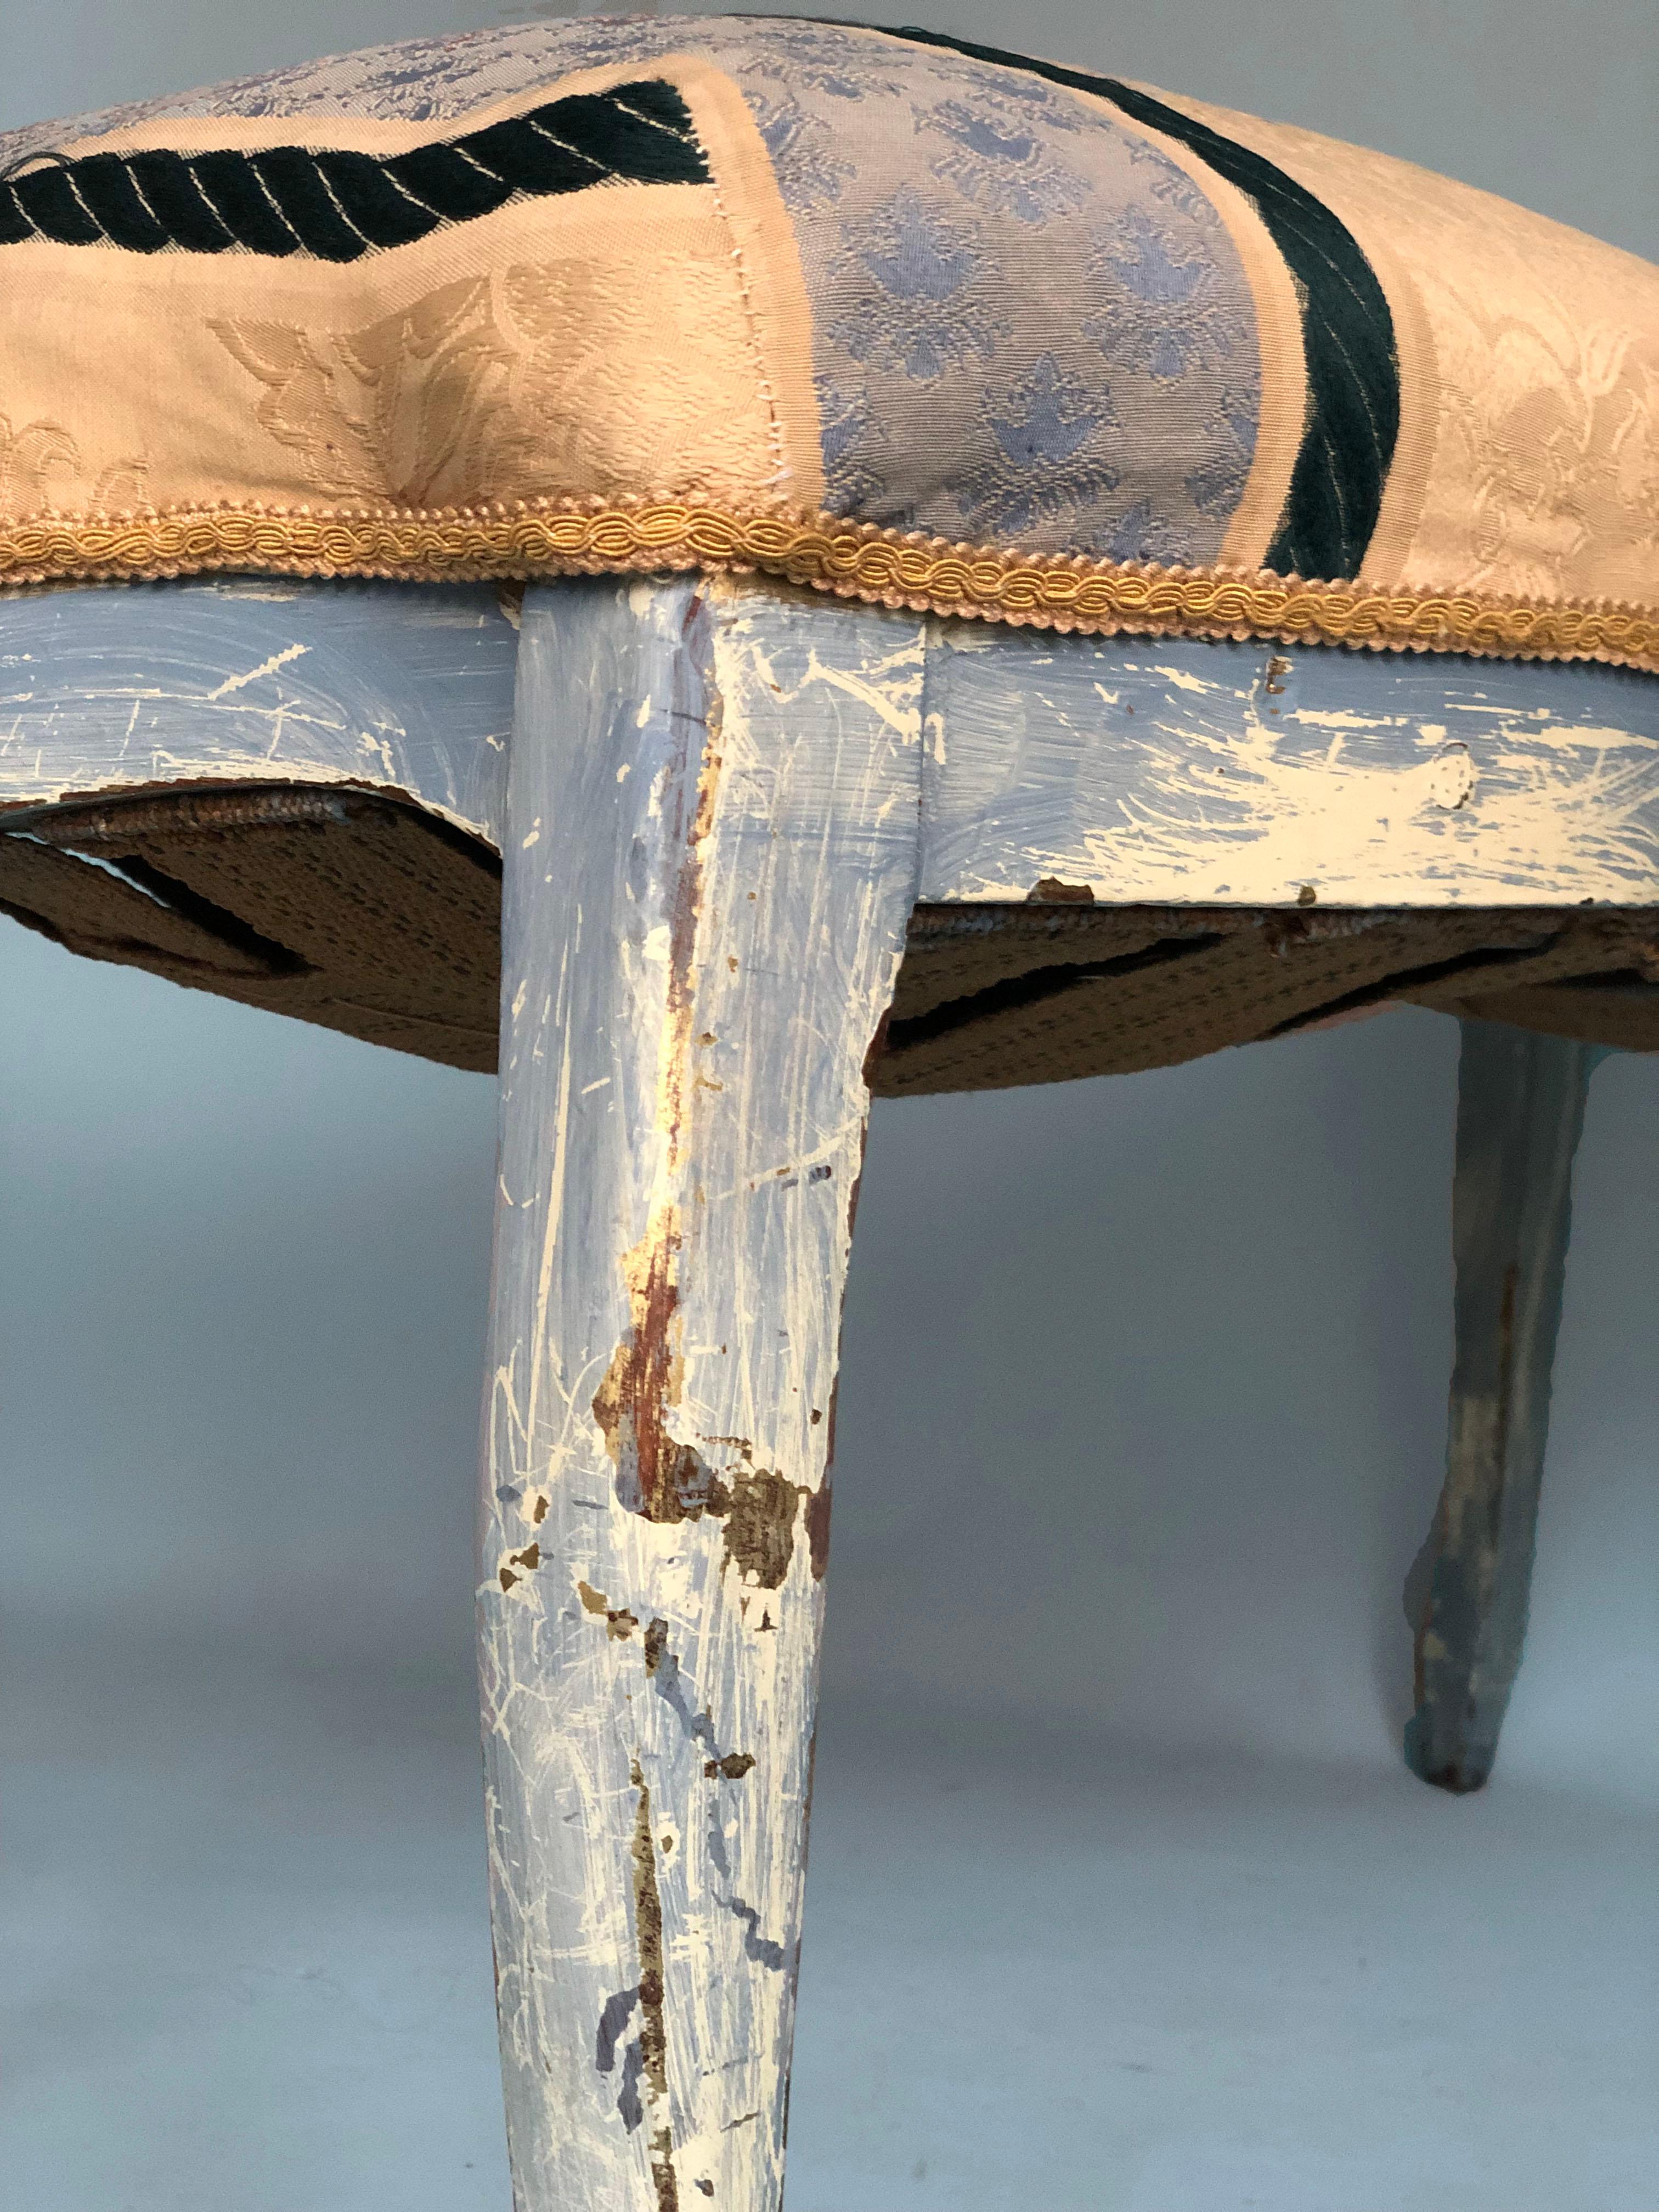 A very detailed walnut bench in Louis XV style late 19th century. The bench is nicely weathered. The legs were painted light blue a long time ago. The seat has the original springs and the detailed fabric is from a later period. Very soft to sit